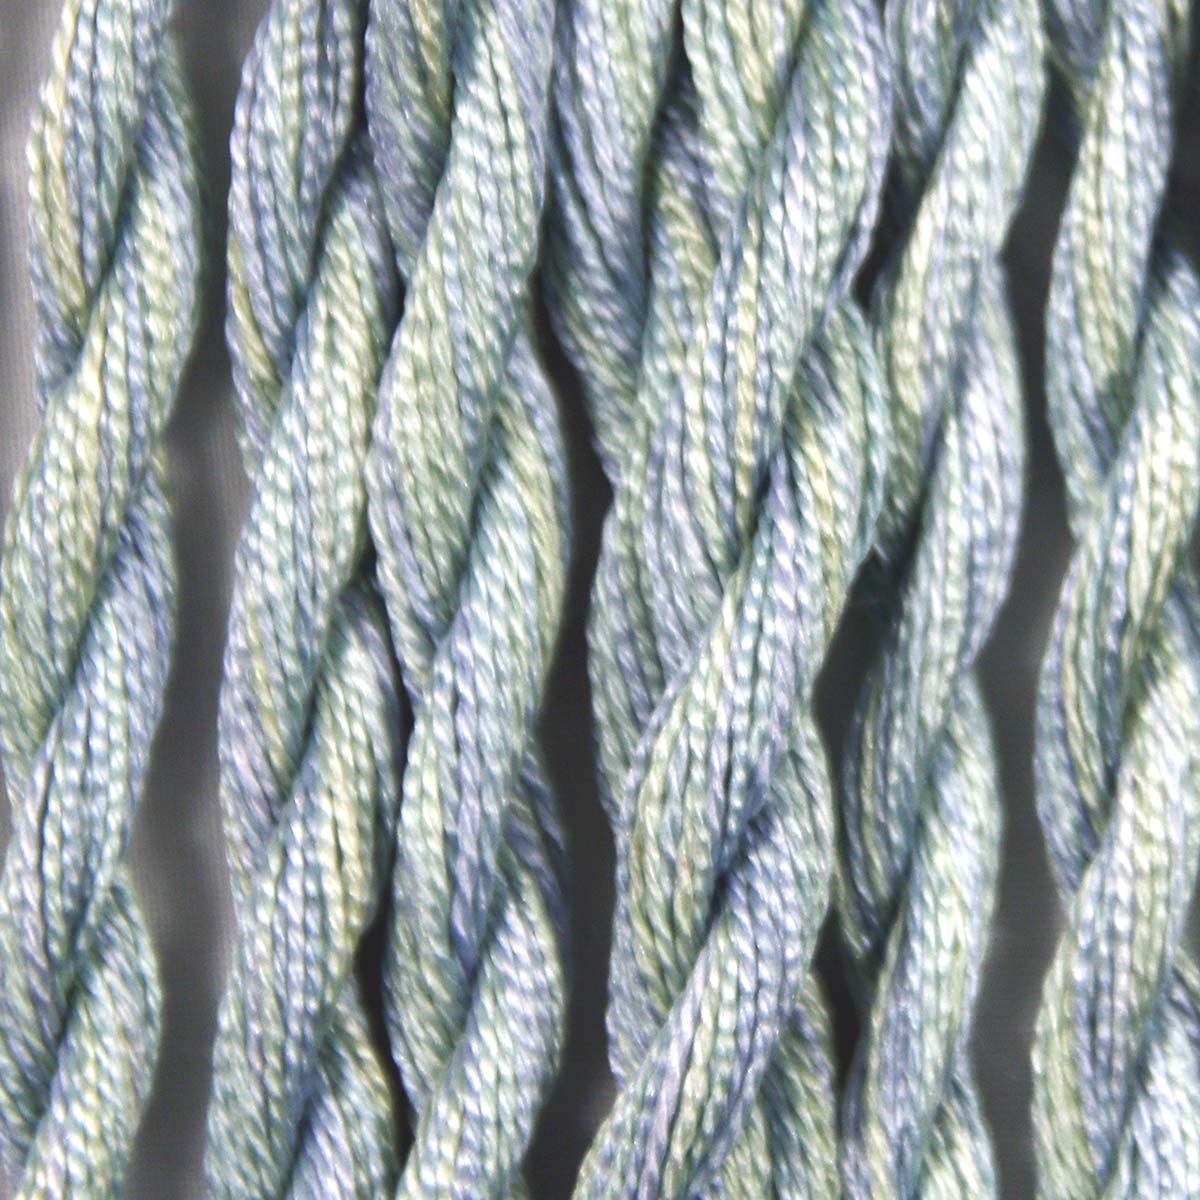 www.colourstreams.com.au Colour Streams Hand Dyed Silk Threads Silken Strands Ophir Exotic Lights Aurora Slow Stitch Embroidery Textile Arts Fibre DL  45 Evensong Blue